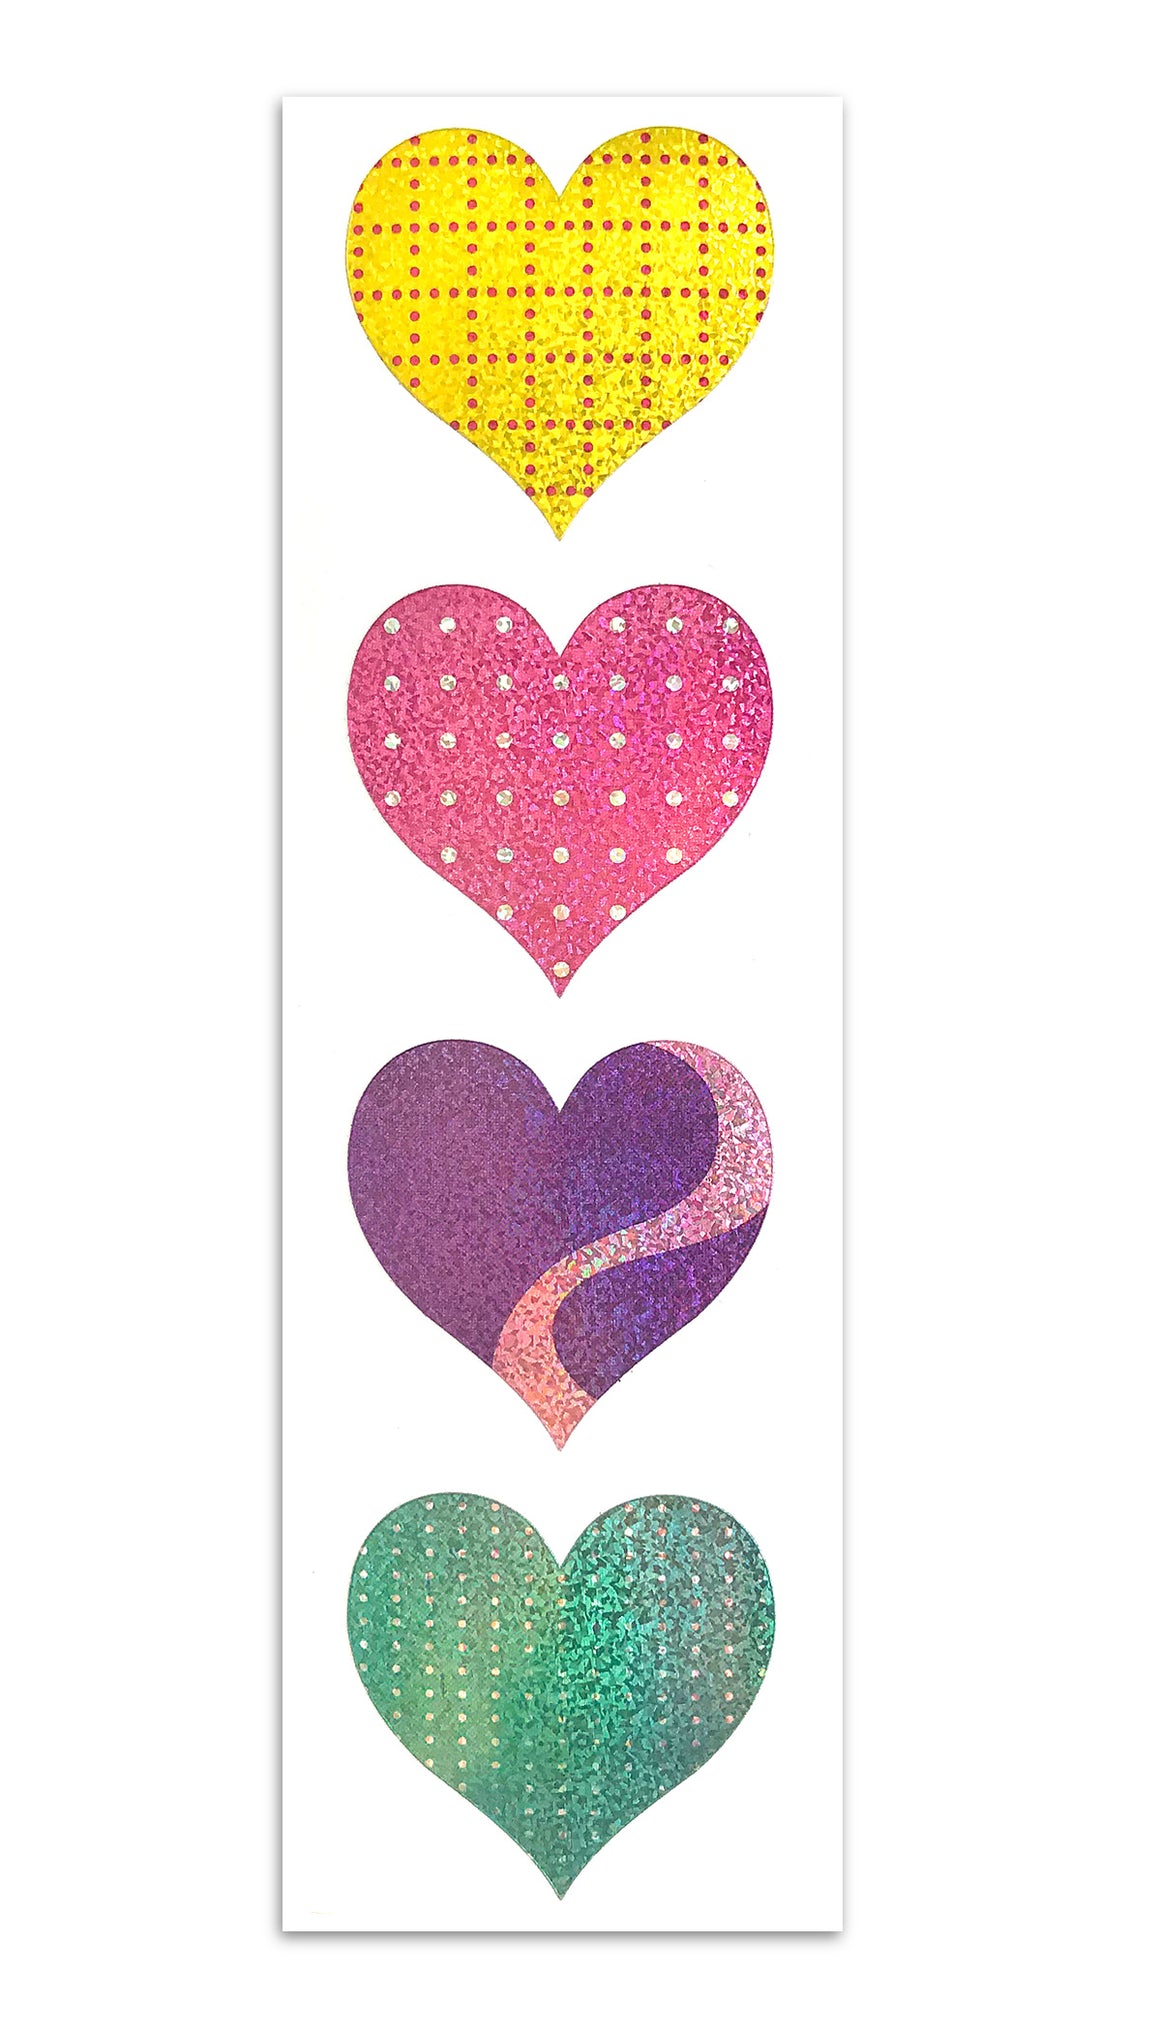 Hearts Tagged large heart stickers - Mrs. Grossman's